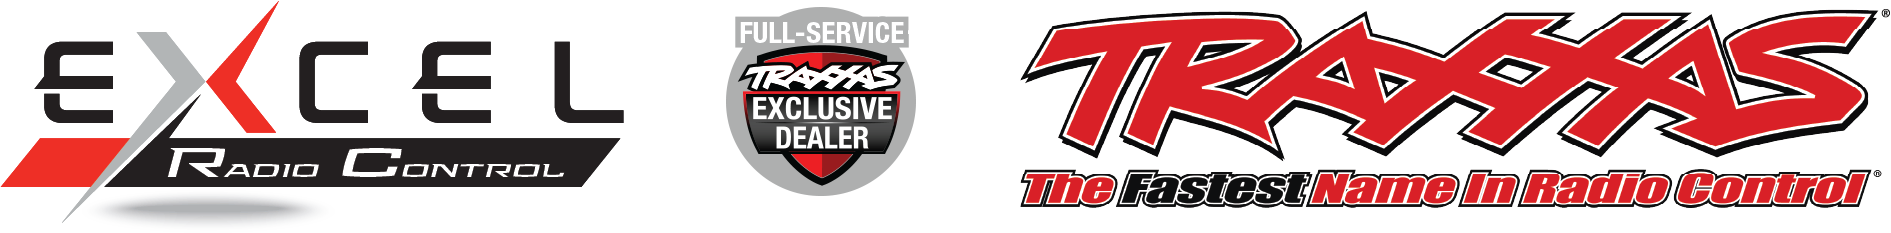 Traxxas Radio Control and Excel RC Open Exclusive Store in Madison Heights, Michigan